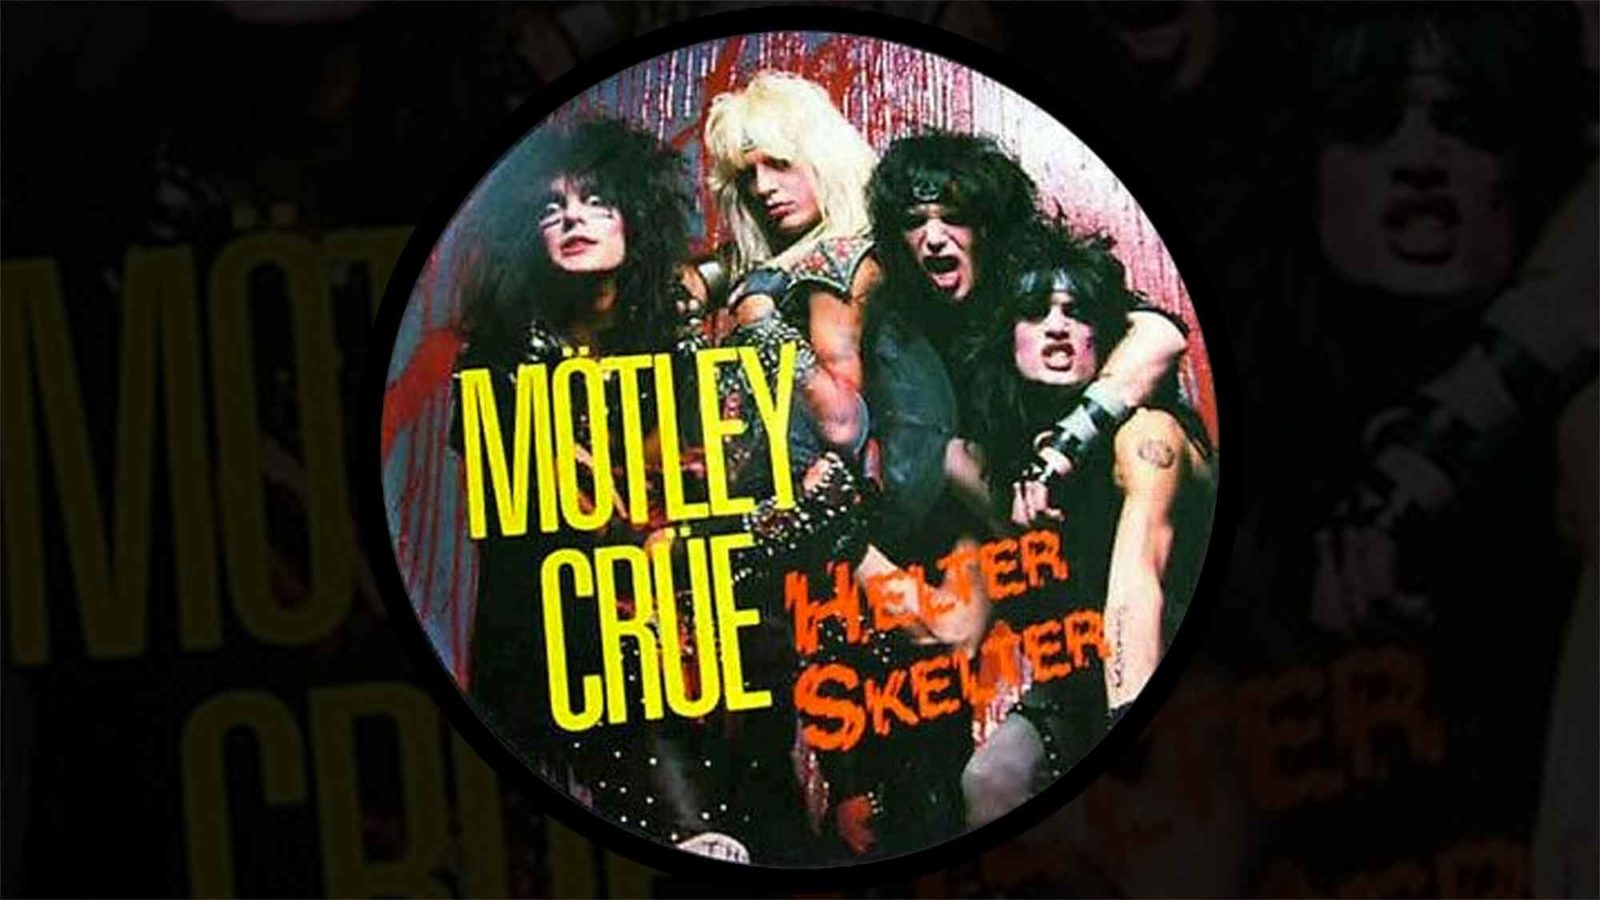 time for change as performed by motley crue